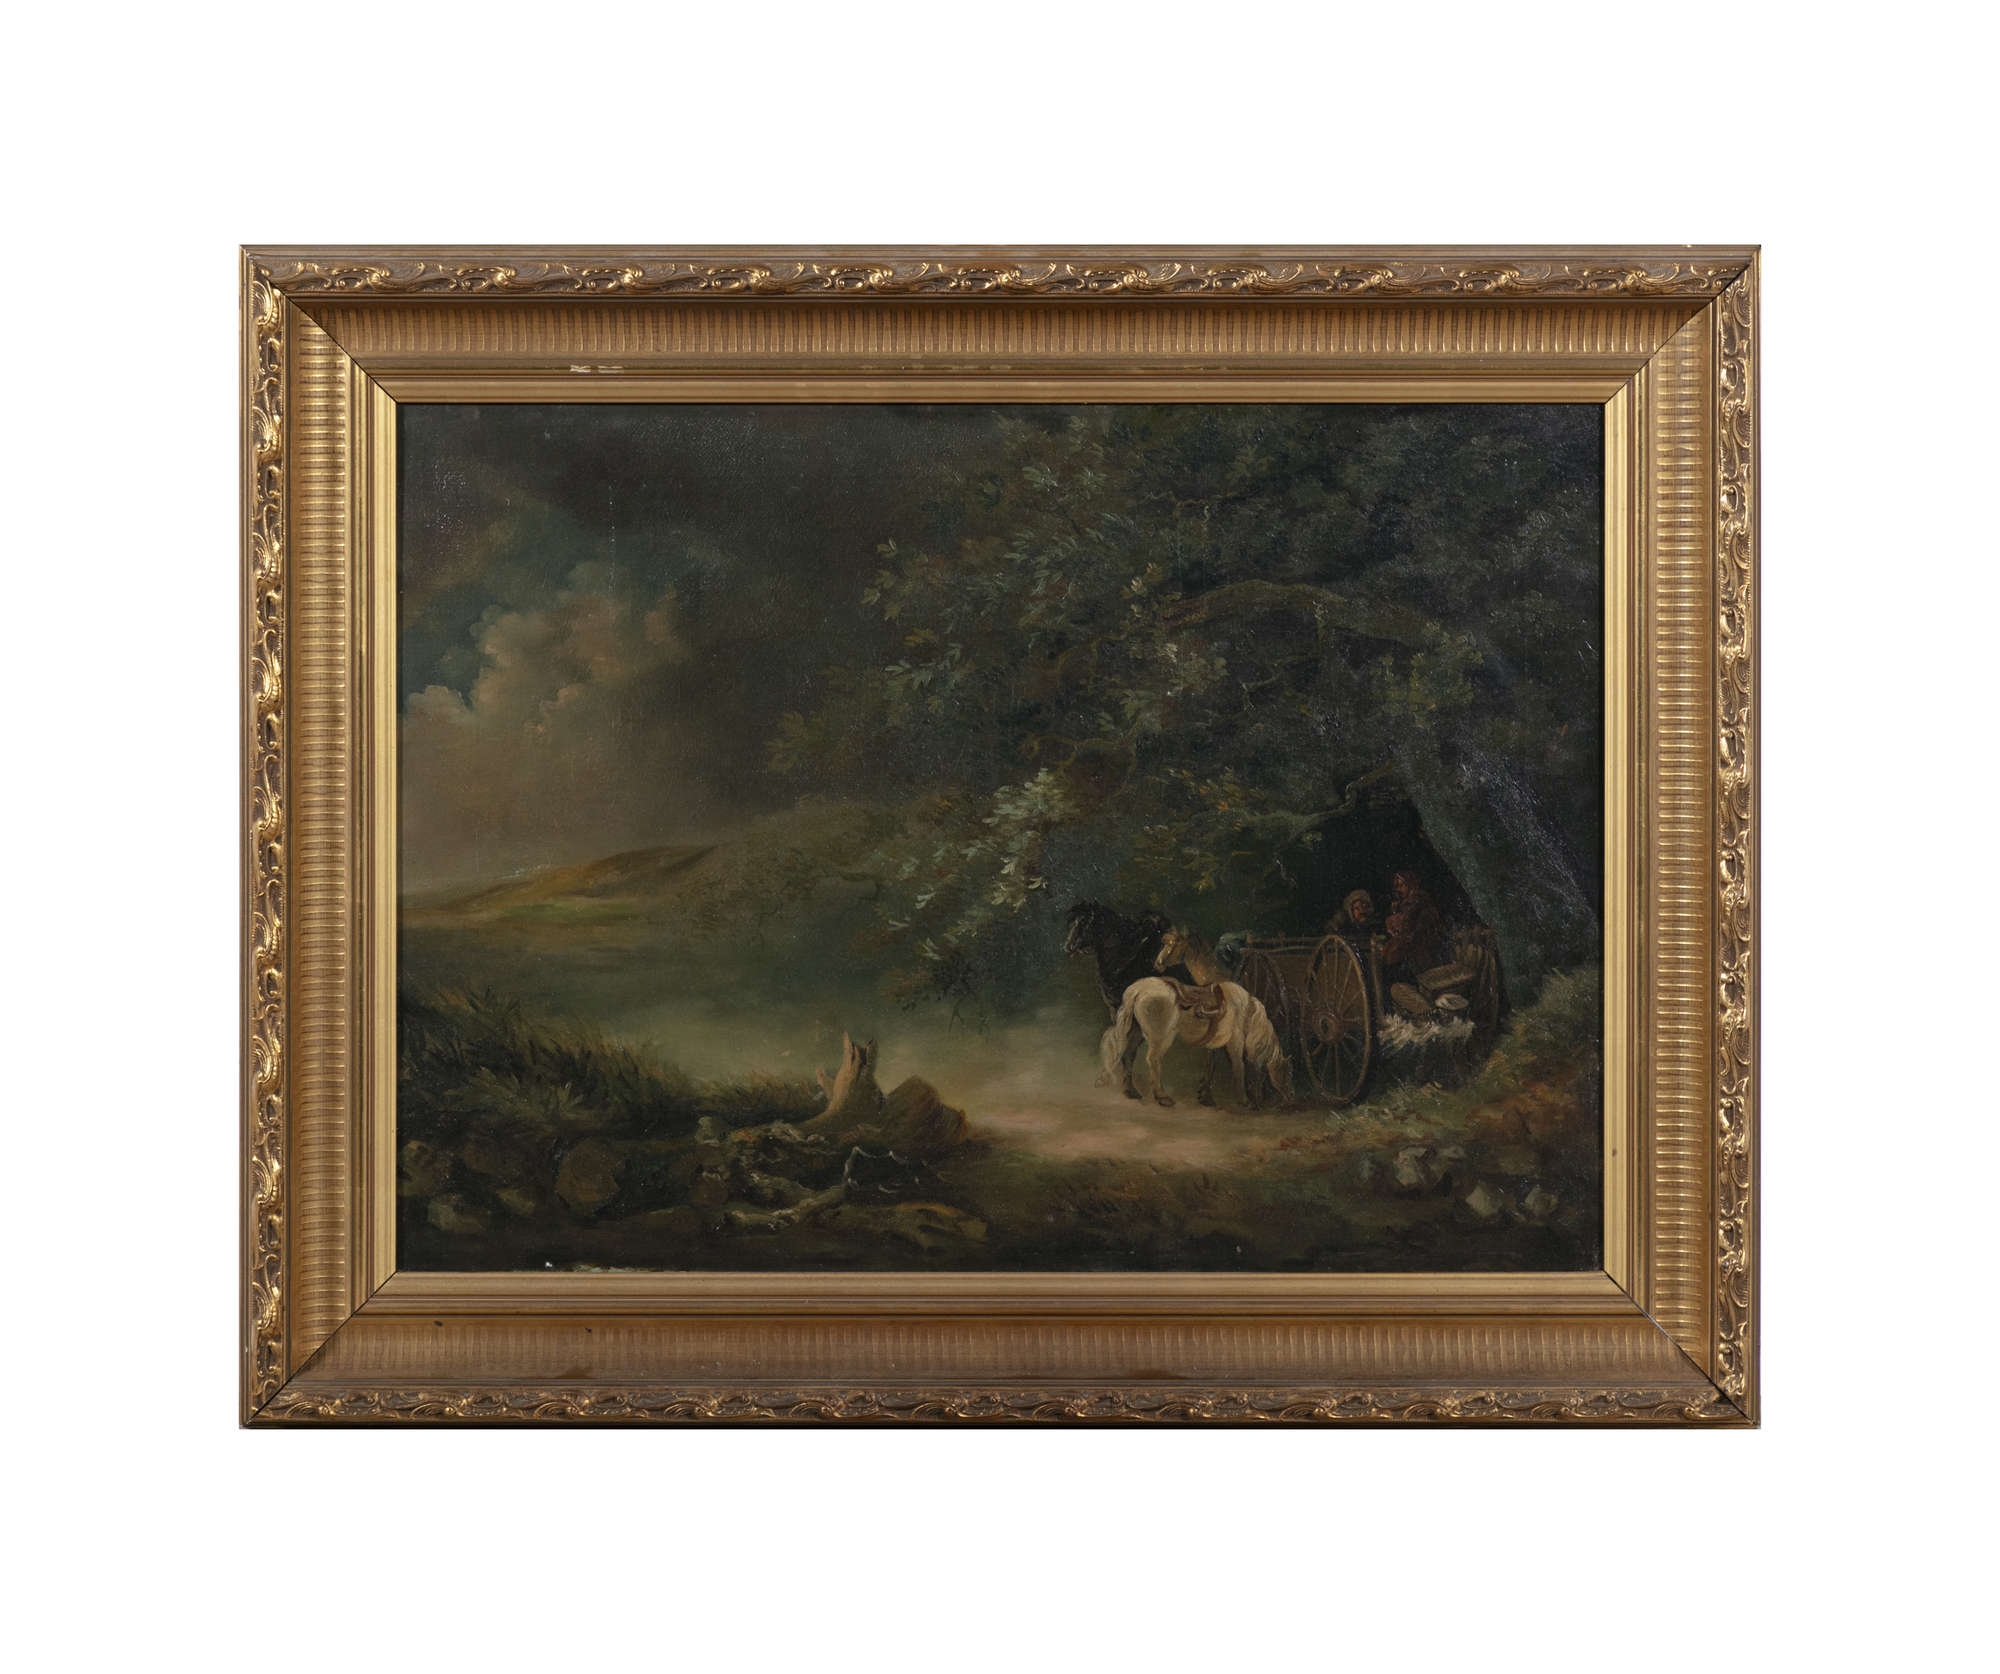 A Wooded Landscape With Travellers Beside a Cart and Horses, - British School, 19th Century